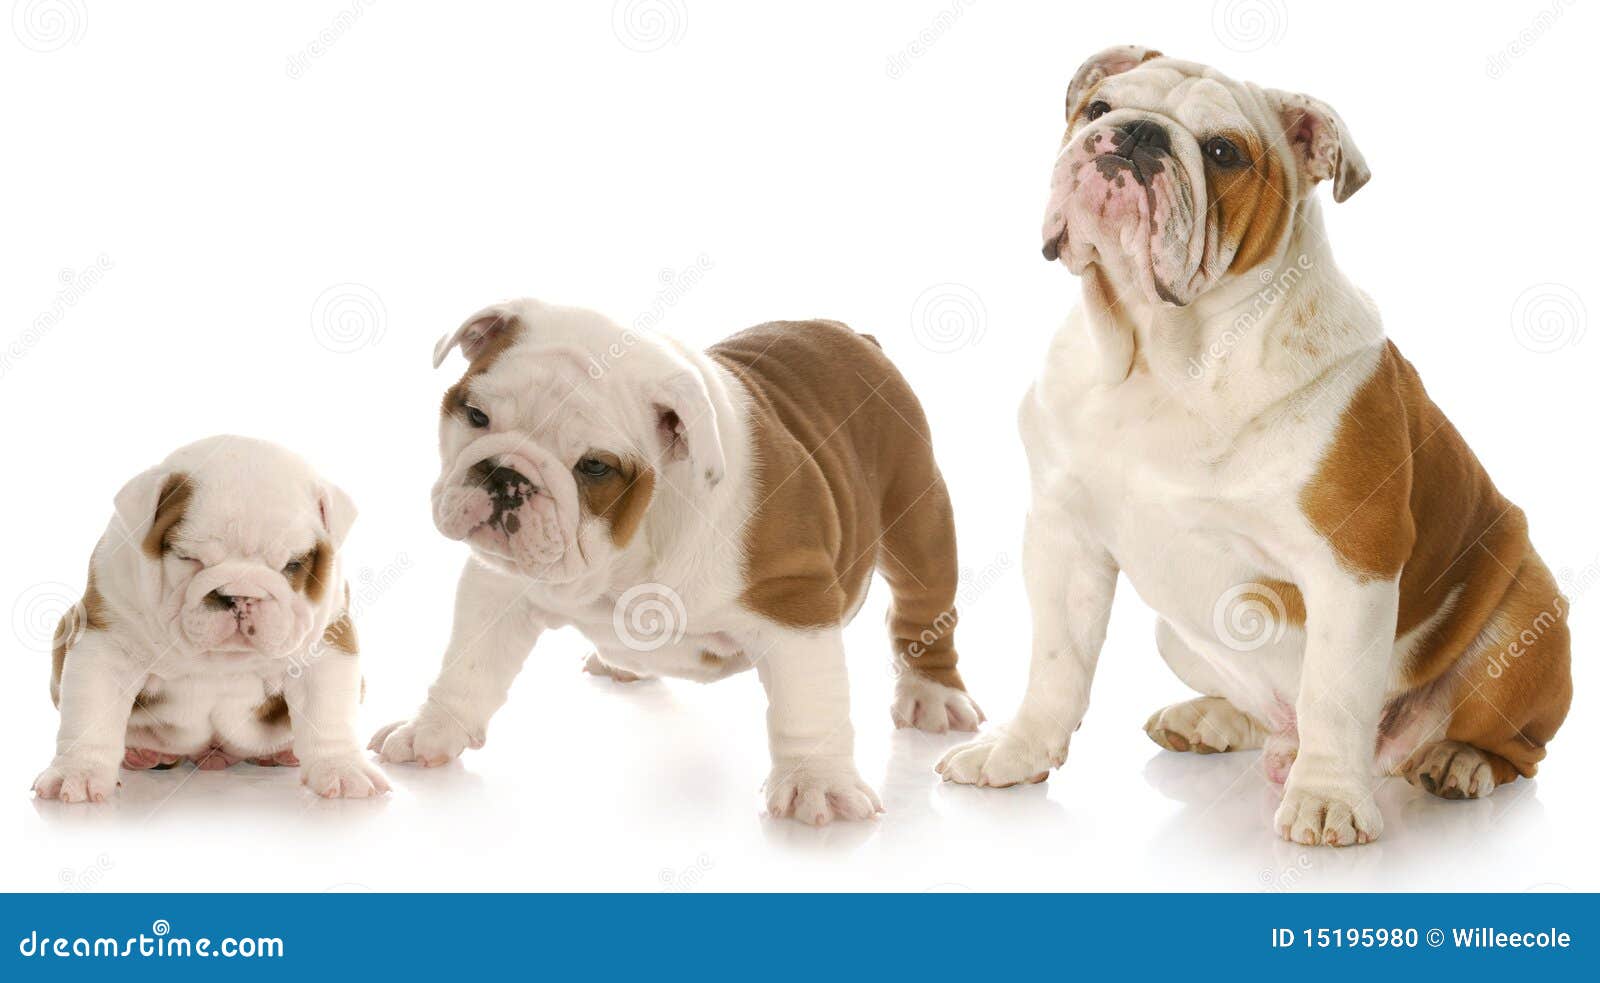 Puppy Growth Stock Photo - Image: 15195980